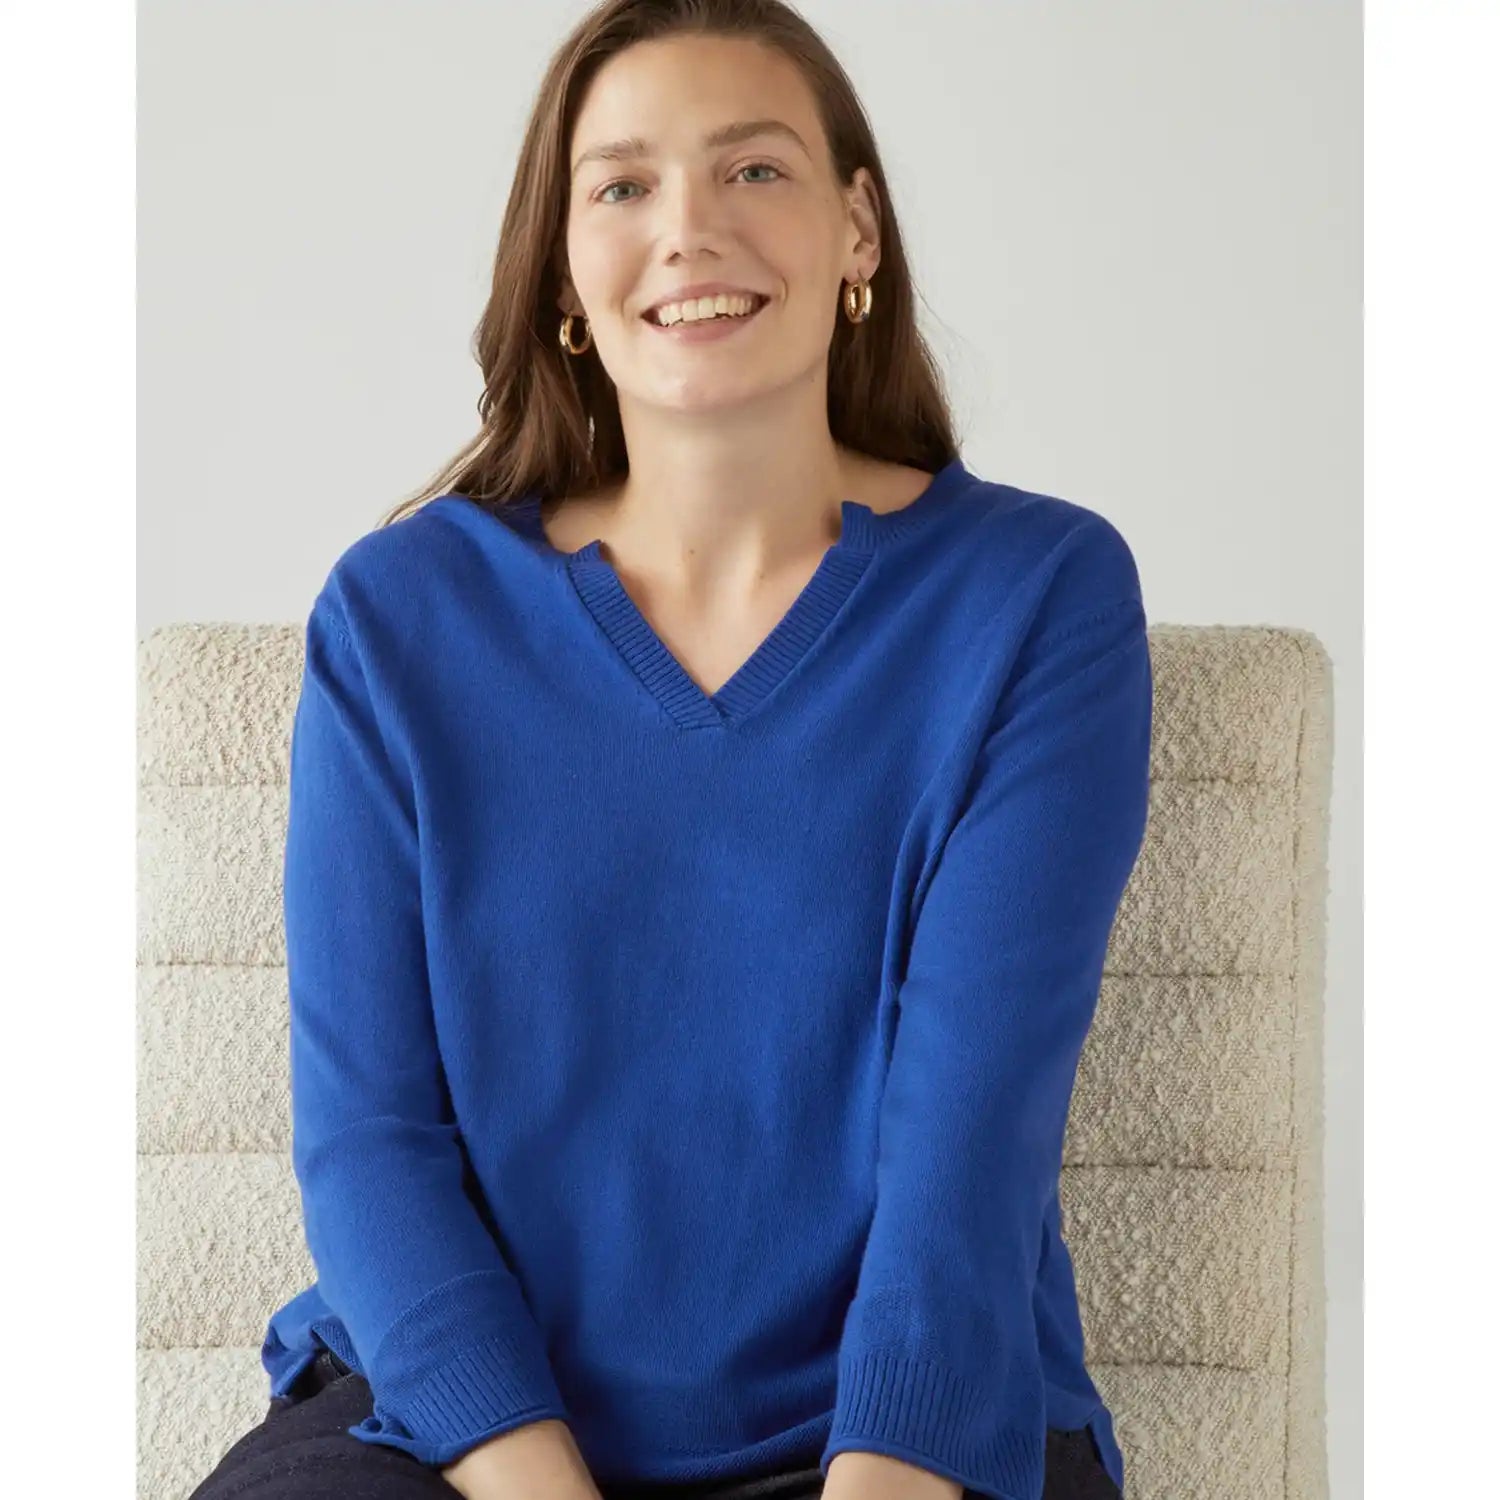 Couchel Knitted Sweater - Blue 1 Shaws Department Stores